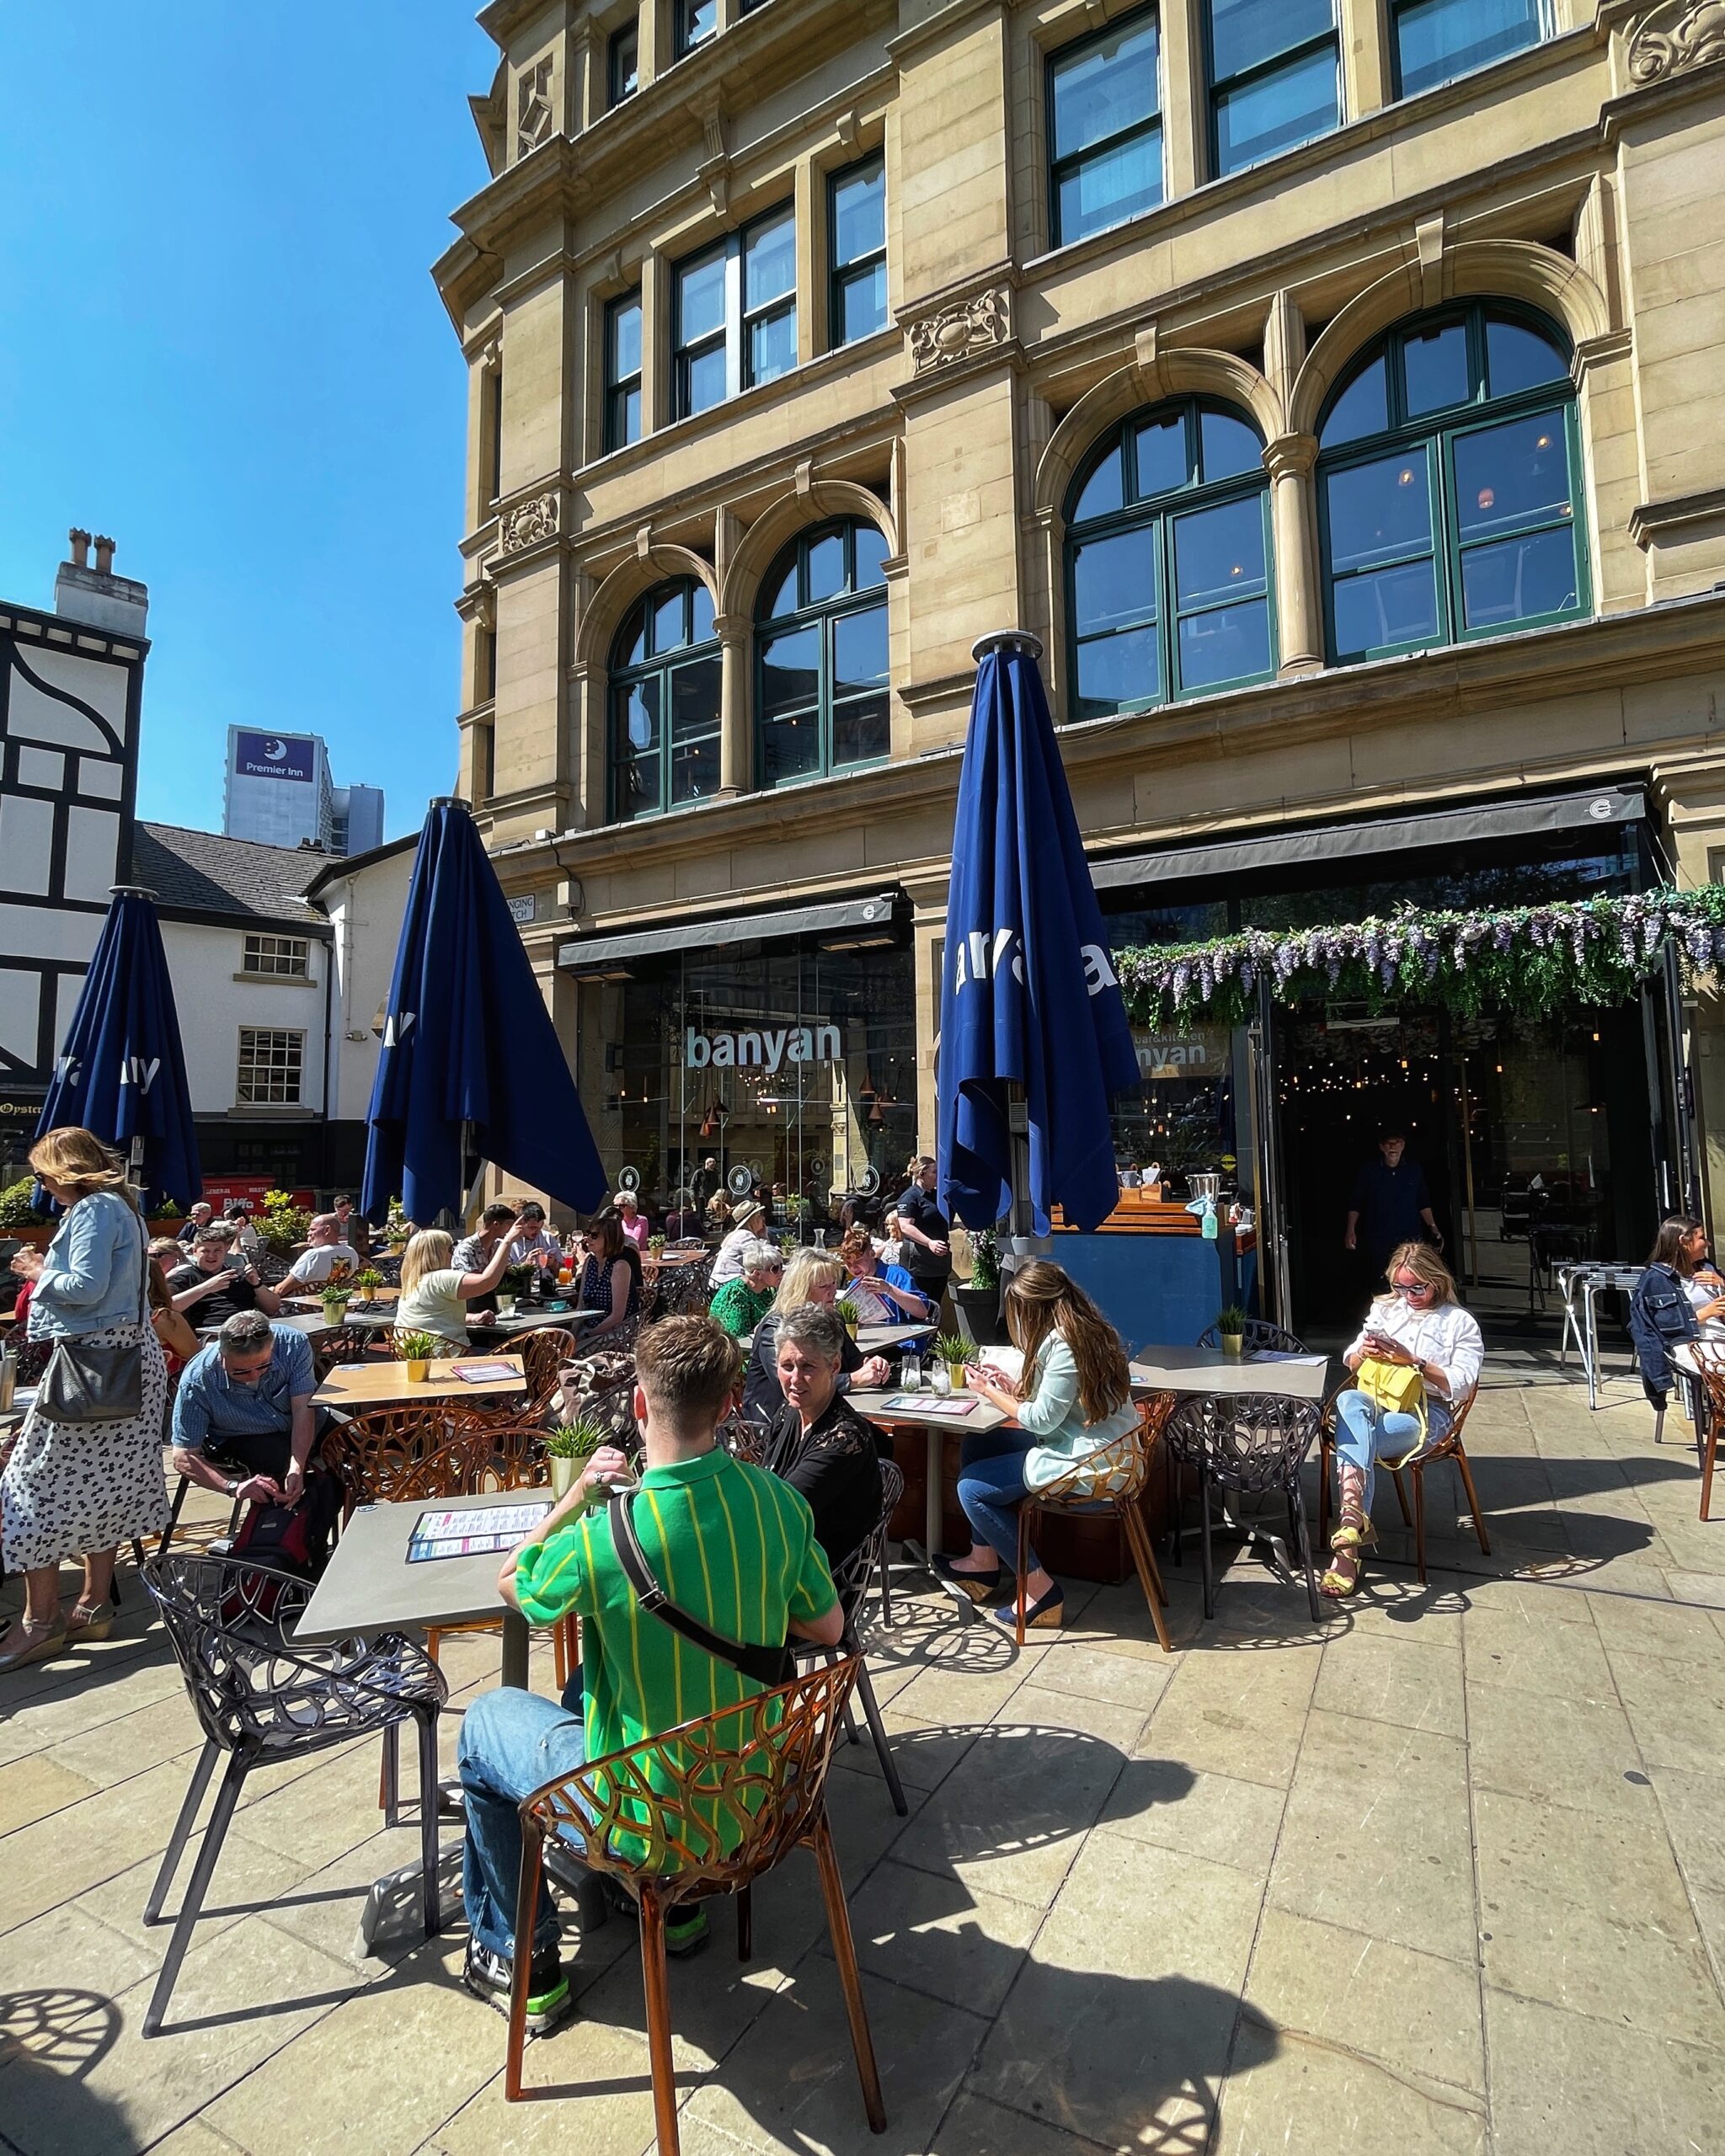 Banyan is one of the most popular outdoor restaurants in Manchester